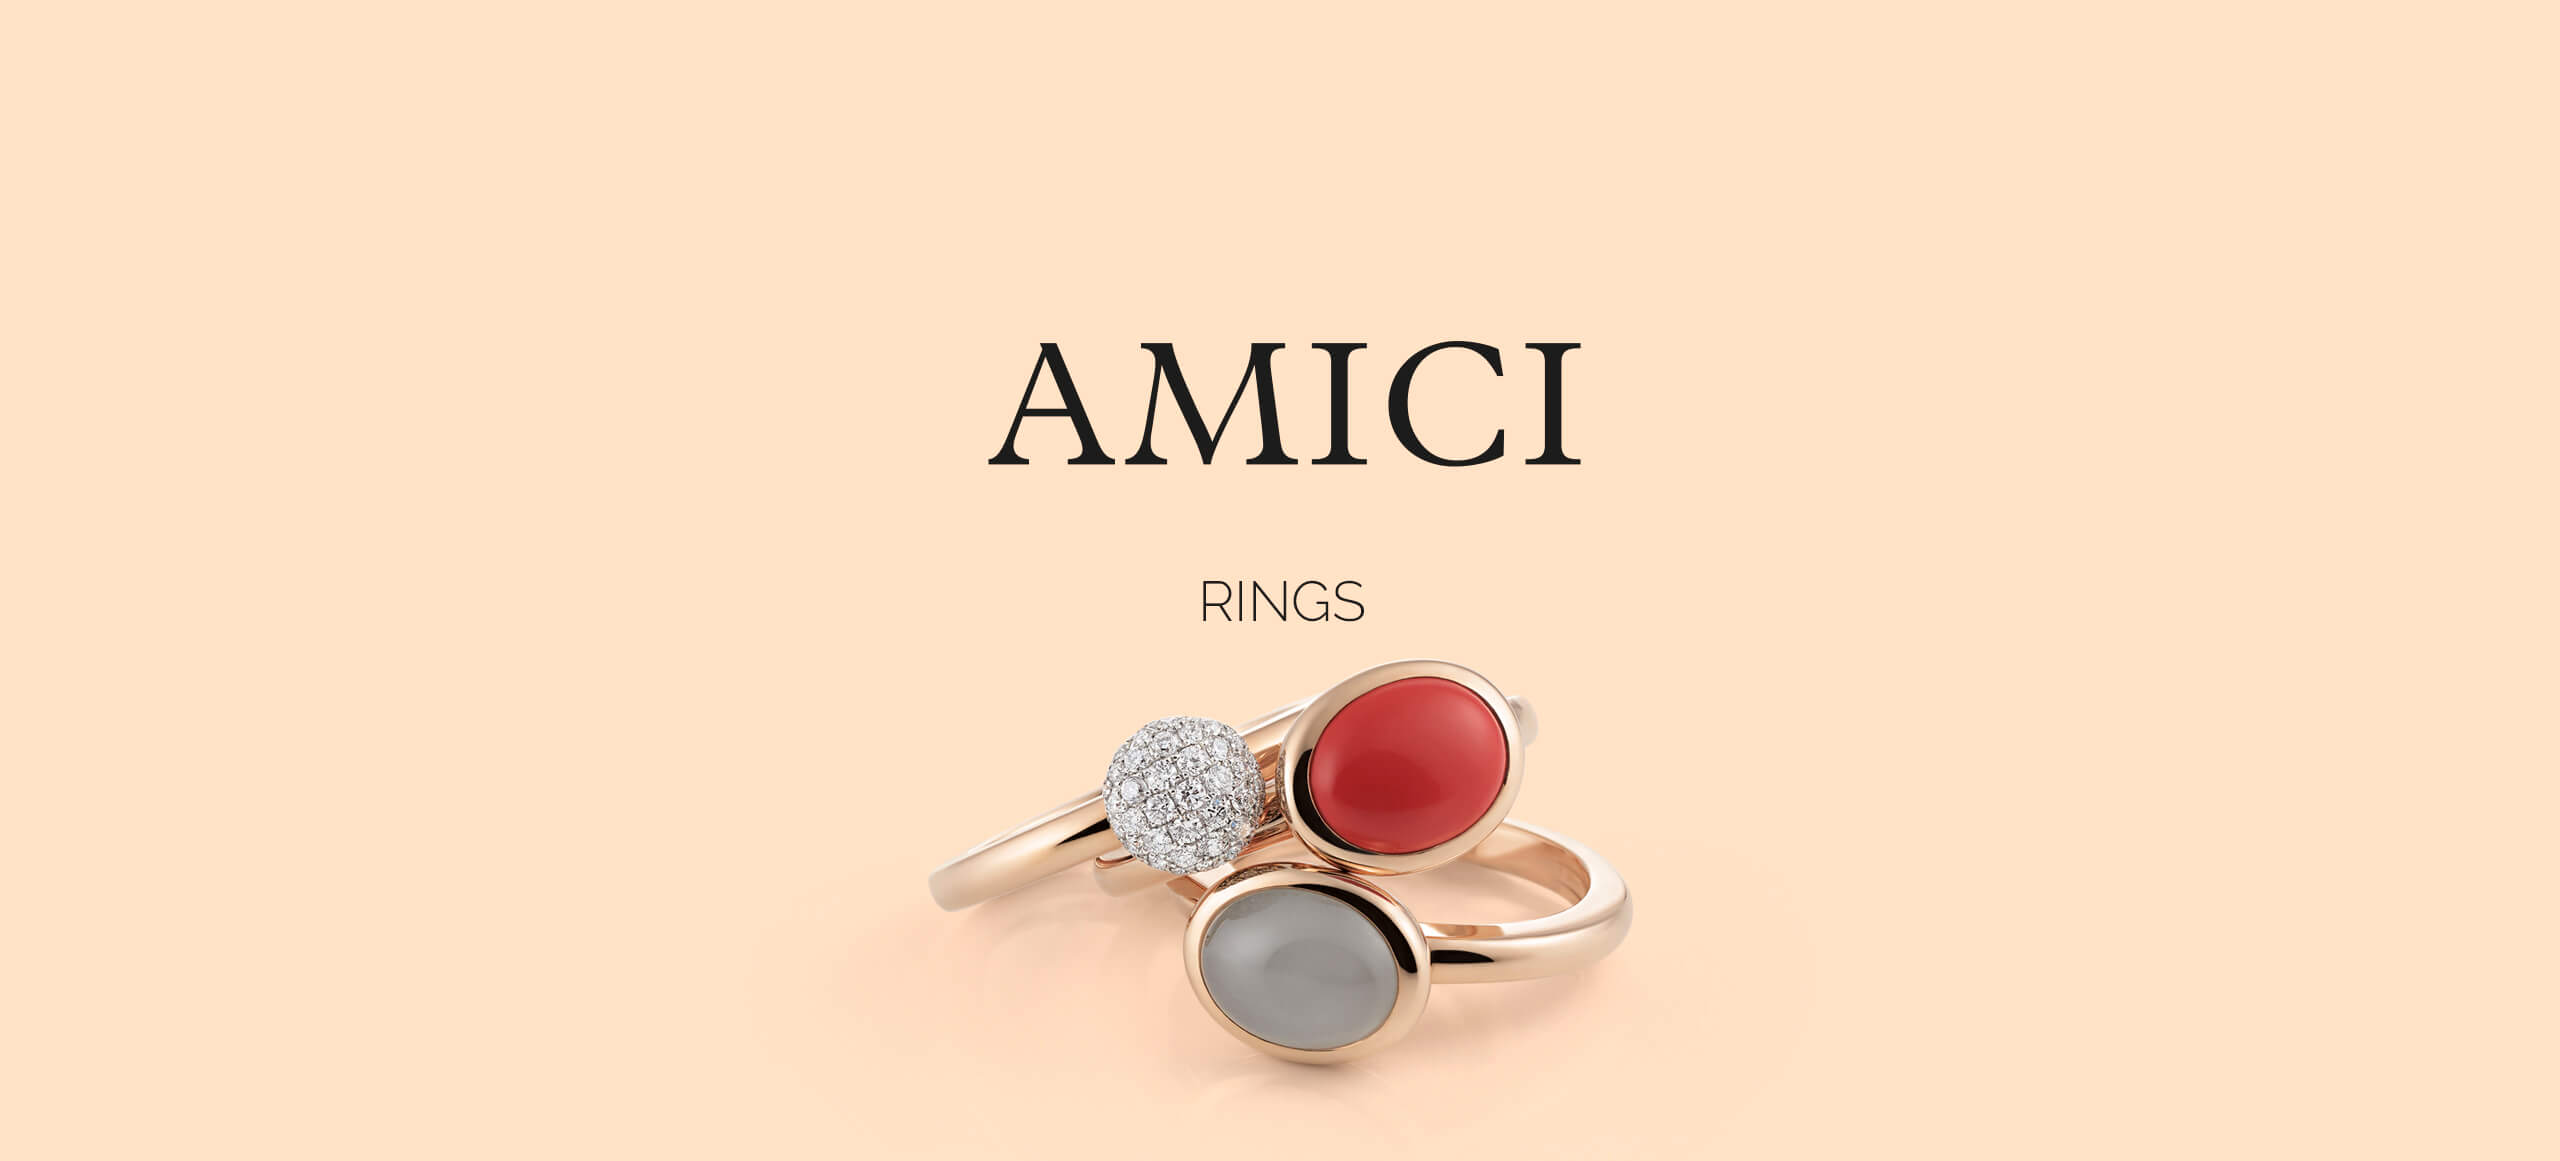 AMICI_Rings_2560_1161